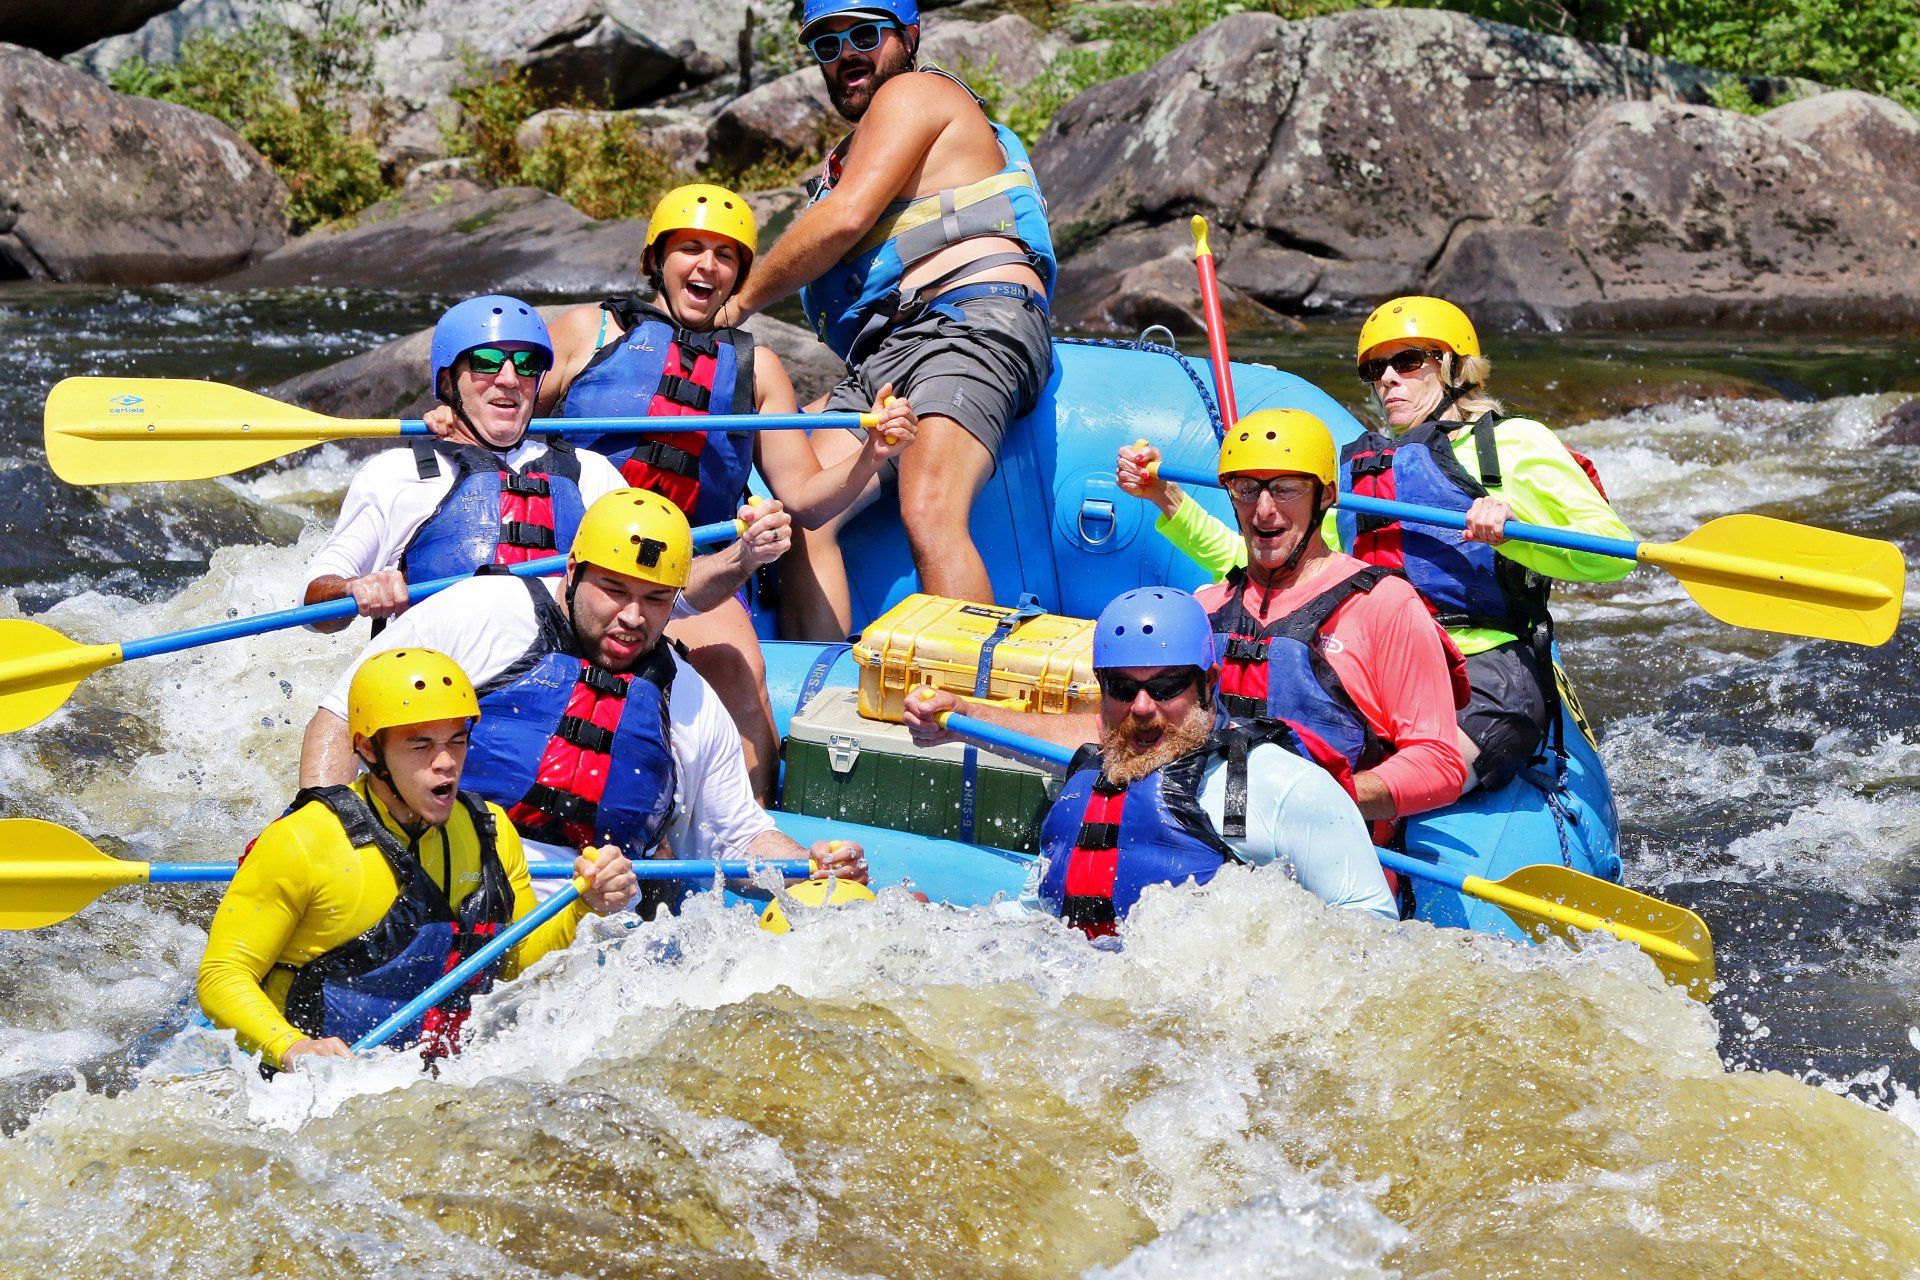 Group of people paddling through whitewater